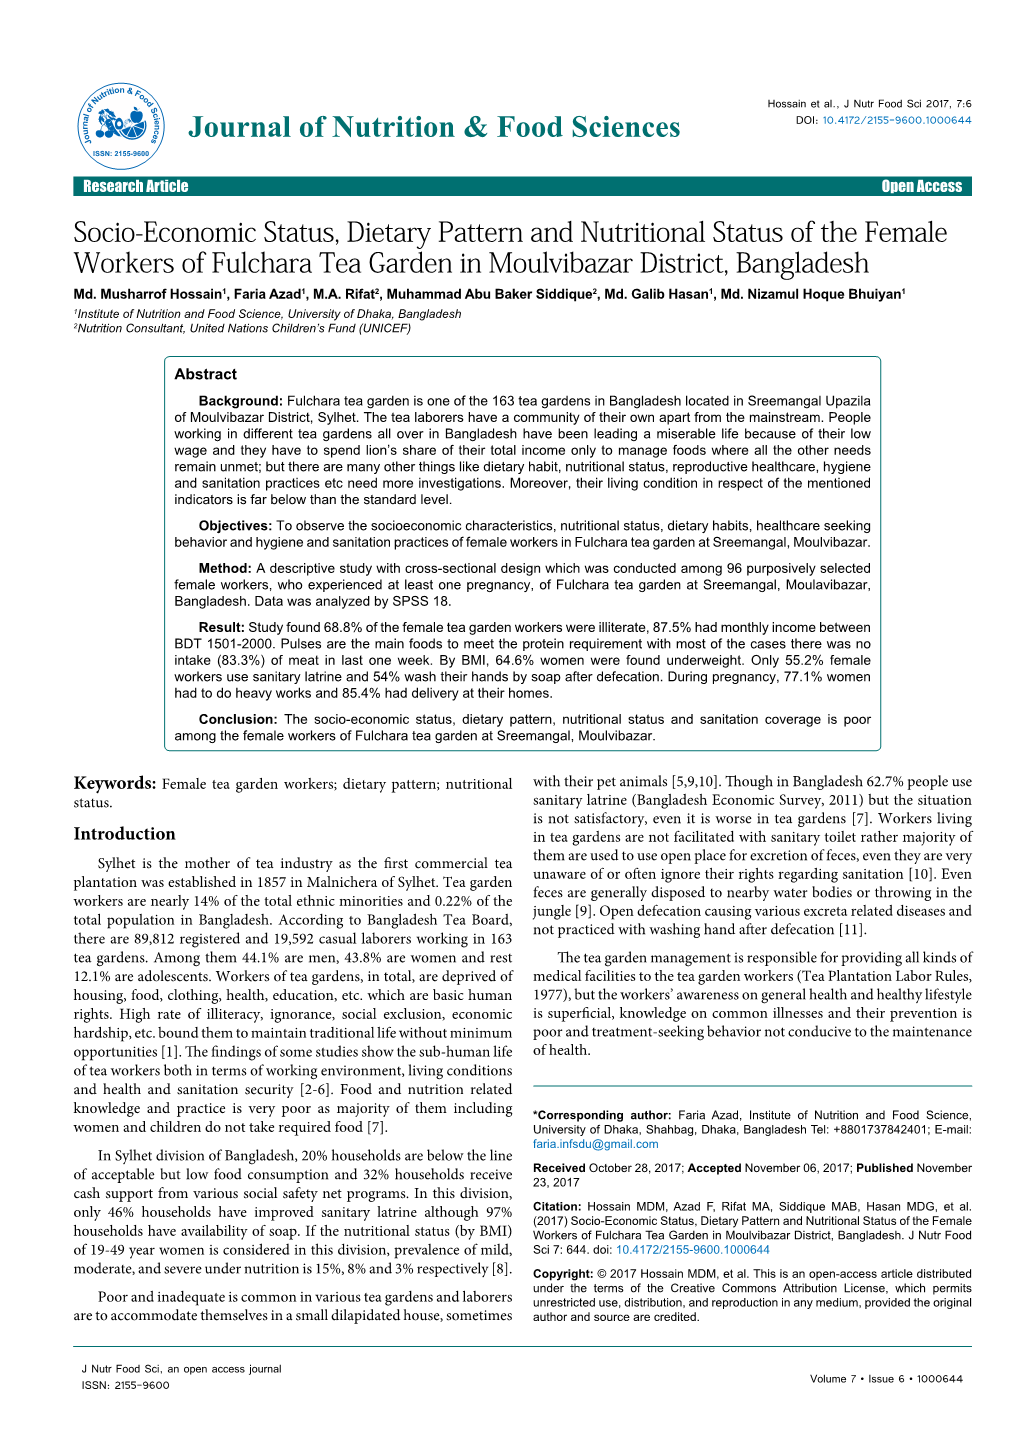 Socio-Economic Status, Dietary Pattern and Nutritional Status of the Female Workers of Fulchara Tea Garden in Moulvibazar District, Bangladesh Md